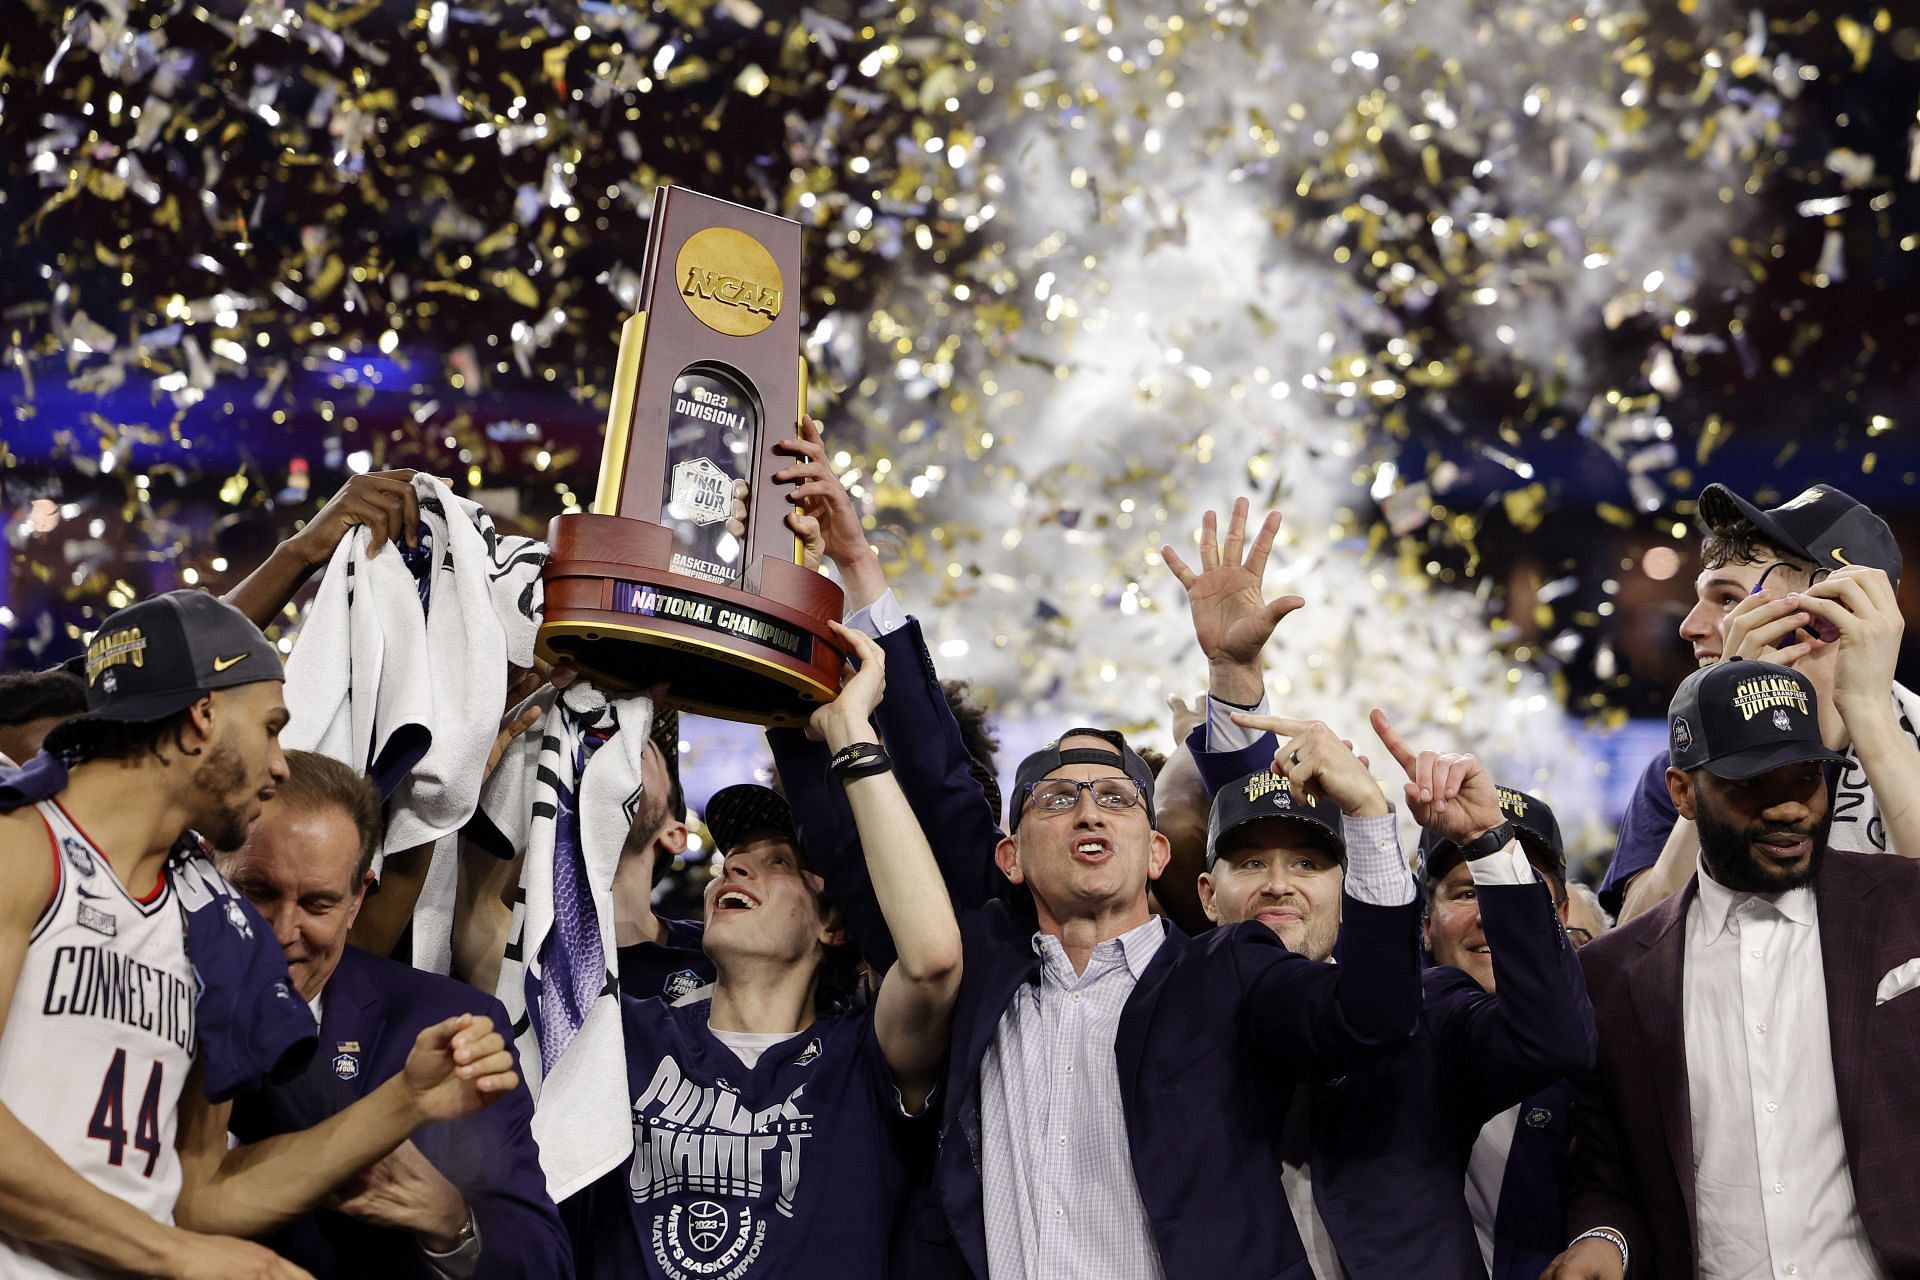 UConn is looking to win back-to-back NCAA titles.